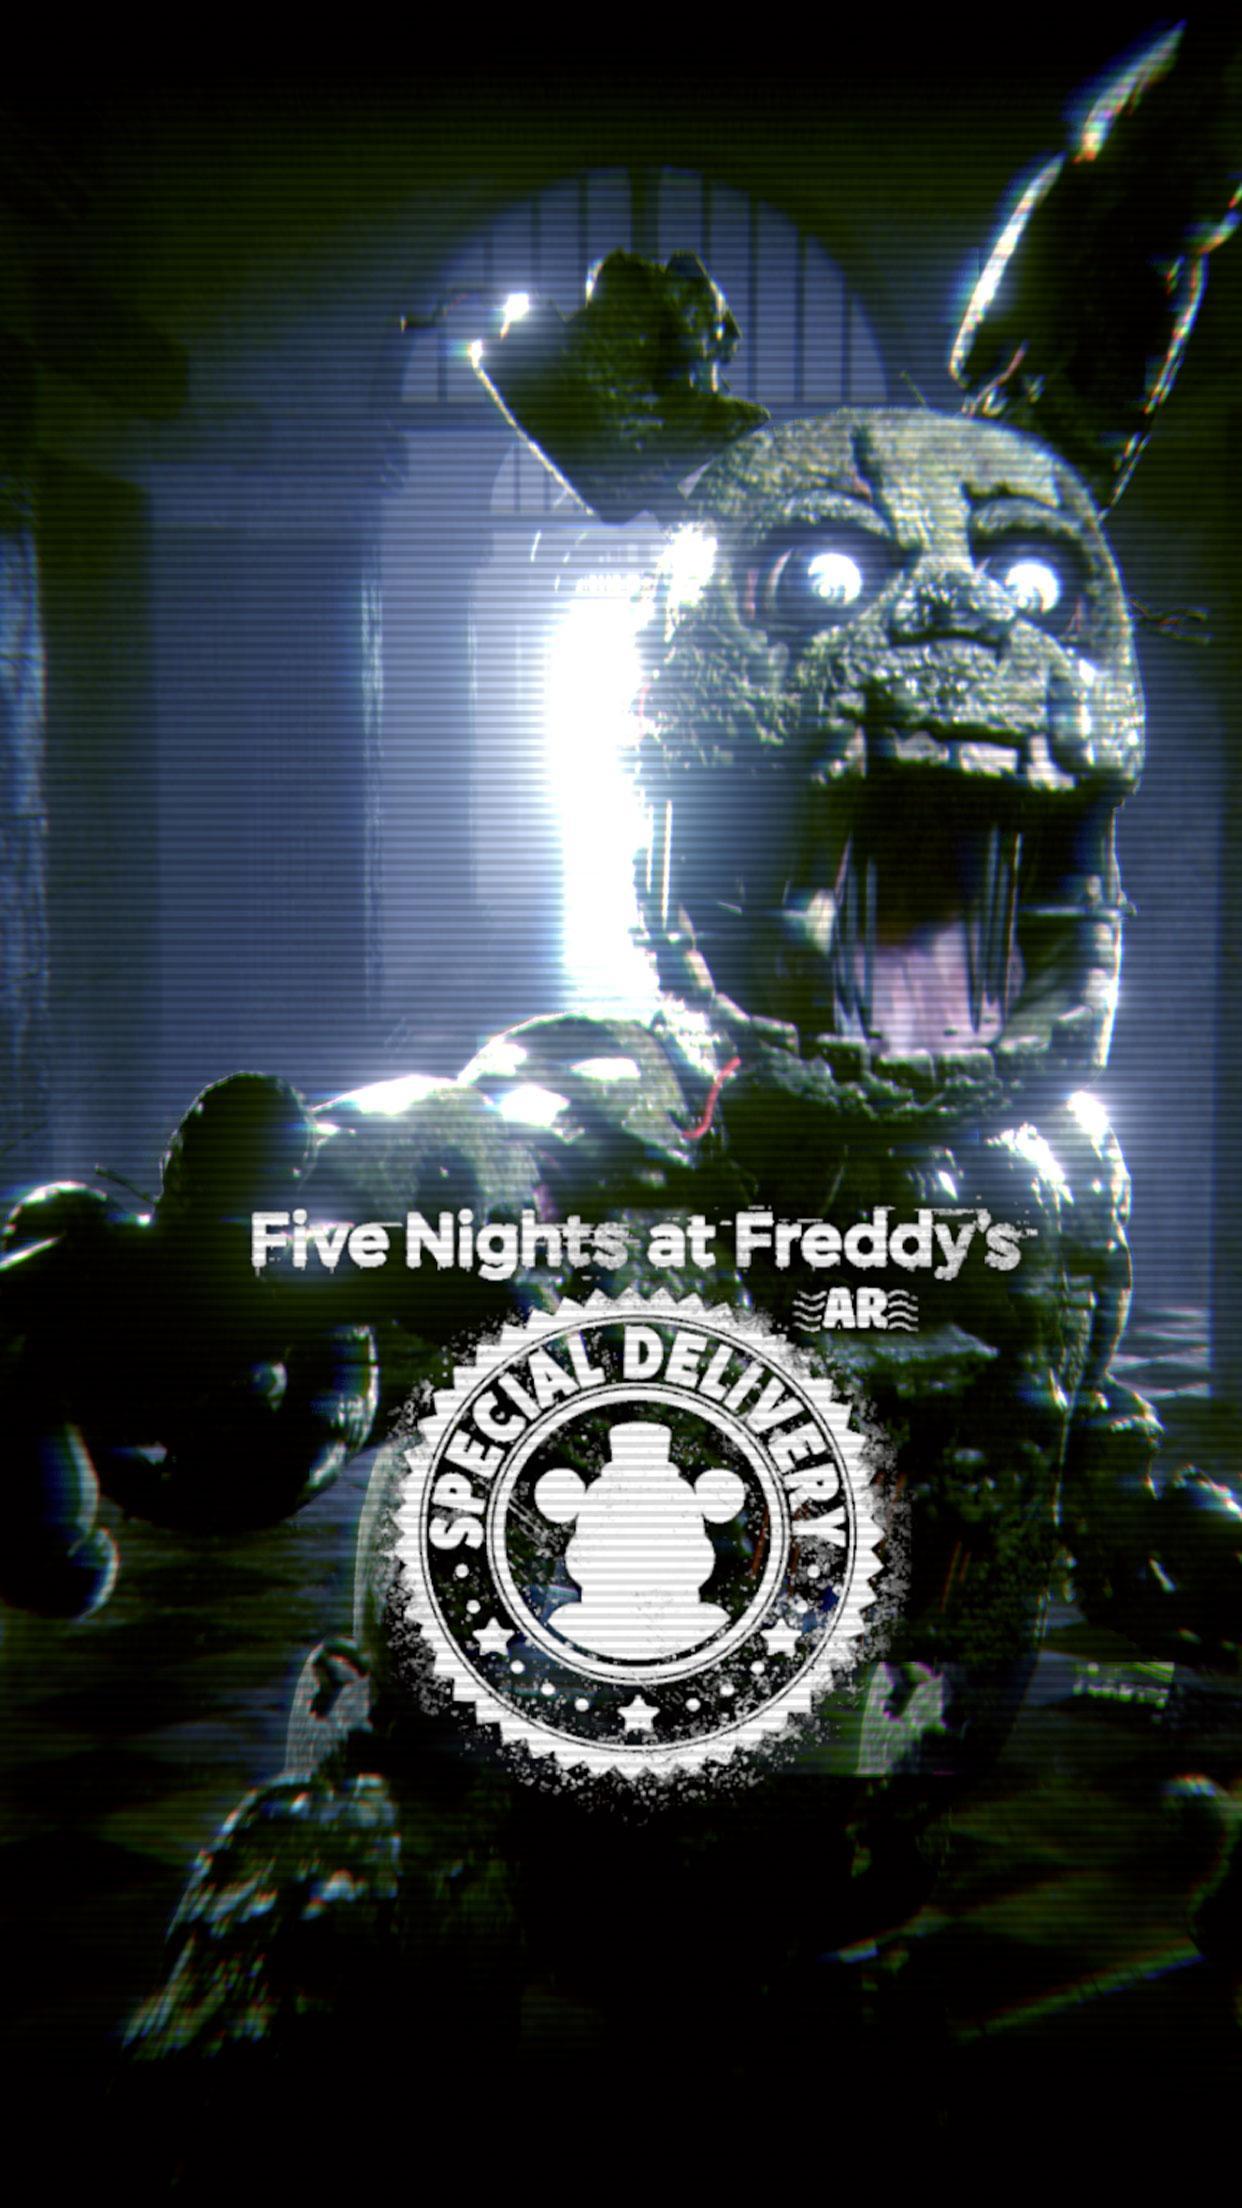 Five Nights at Freddy's AR: Special Delivery 13.0.0 Screenshot 1